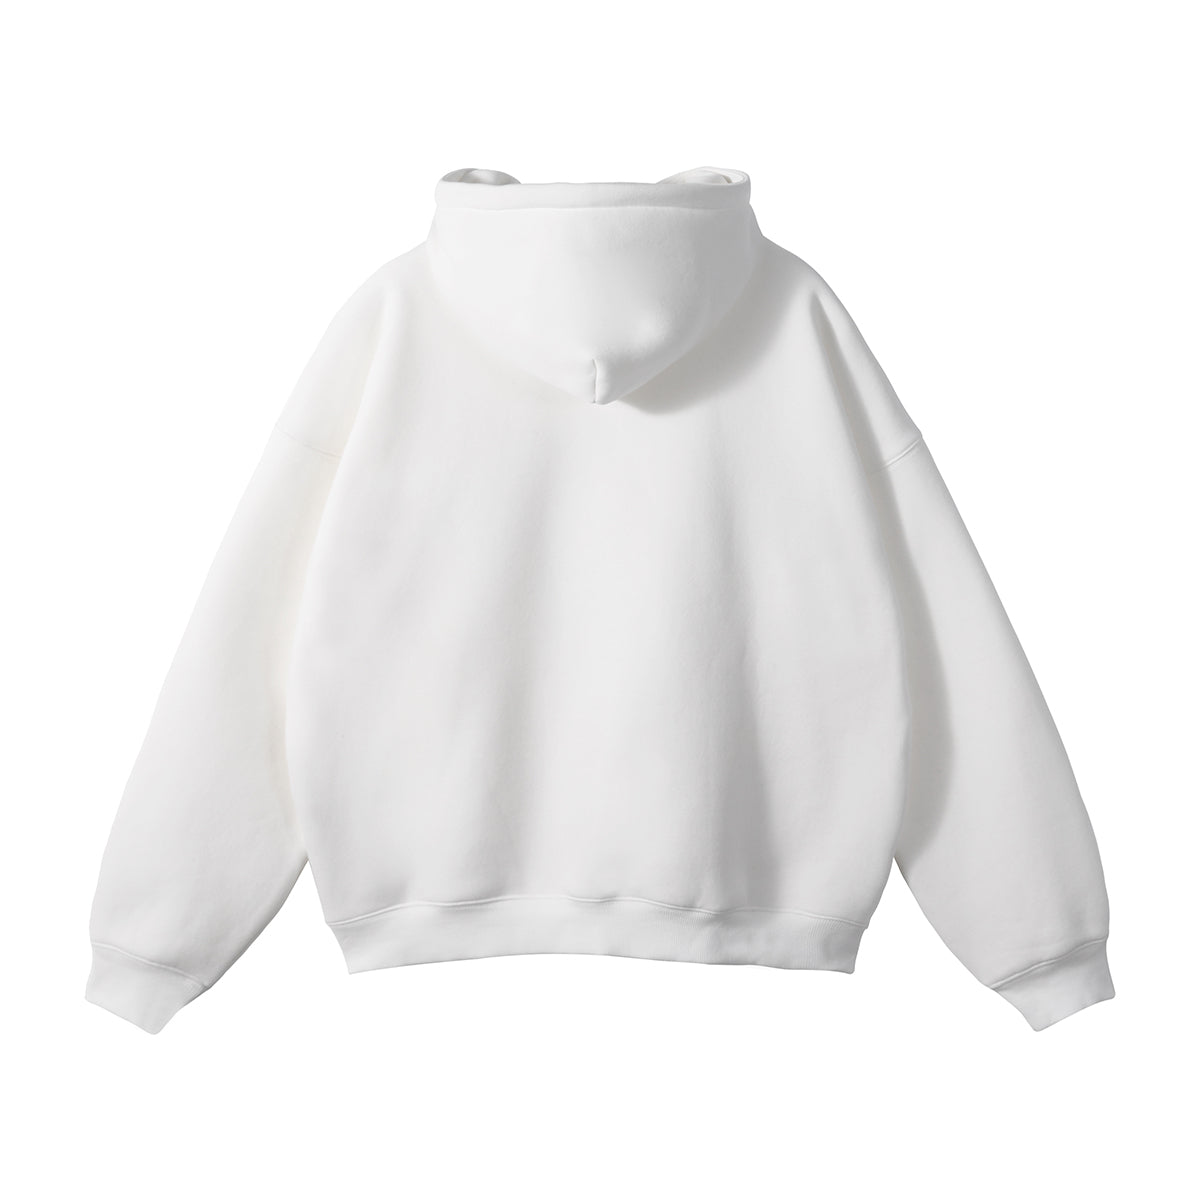 SOLID WHITE HOODIE